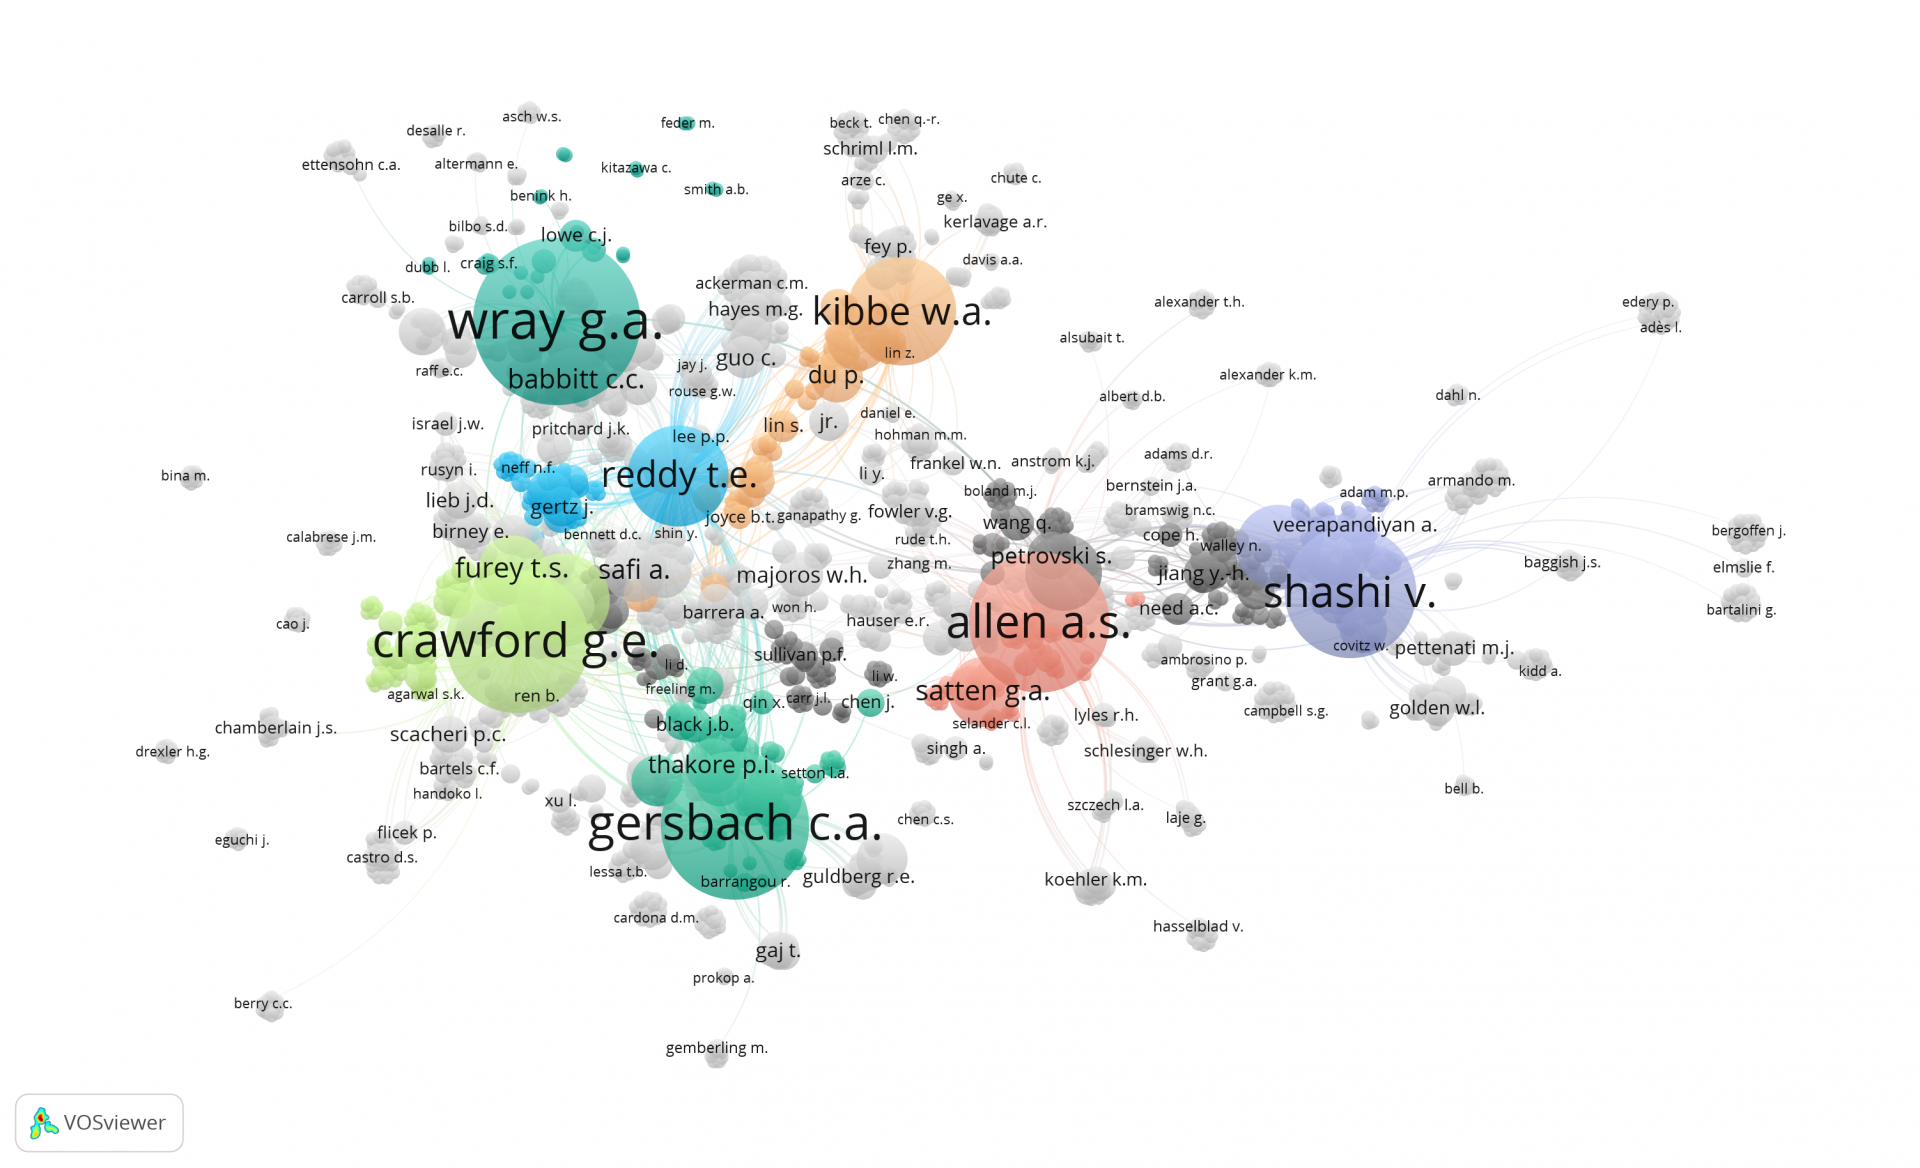 CCGR_coauthor network of scientists